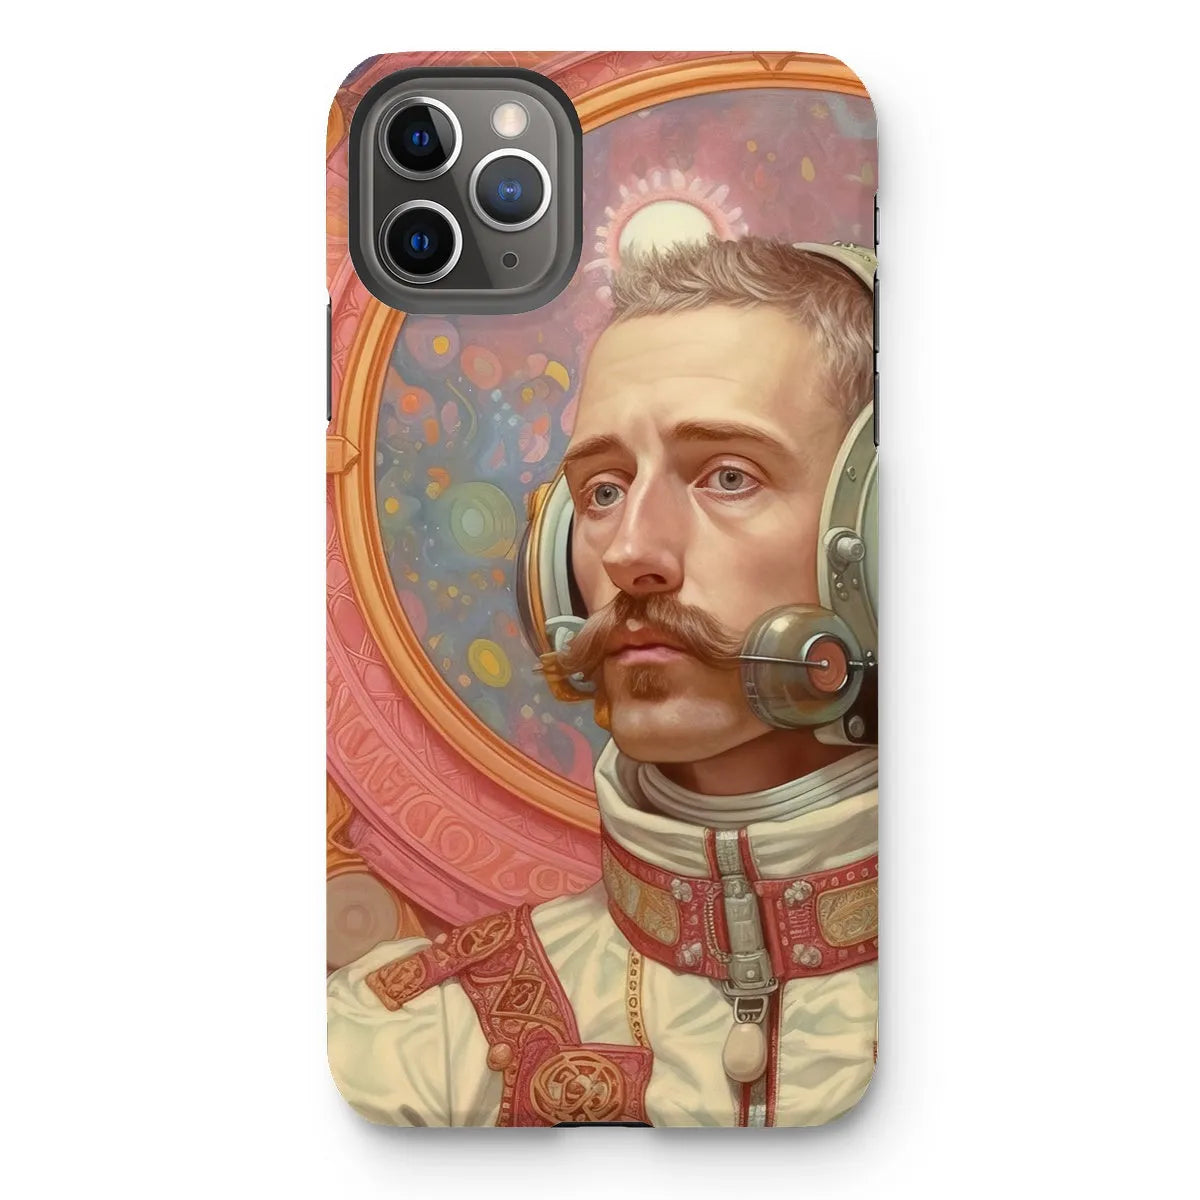 Axel The Gay Astronaut - Gay Aesthetic Art Phone Case - Iphone 11 Pro Max / Matte - Mobile Phone Cases - Aesthetic Art